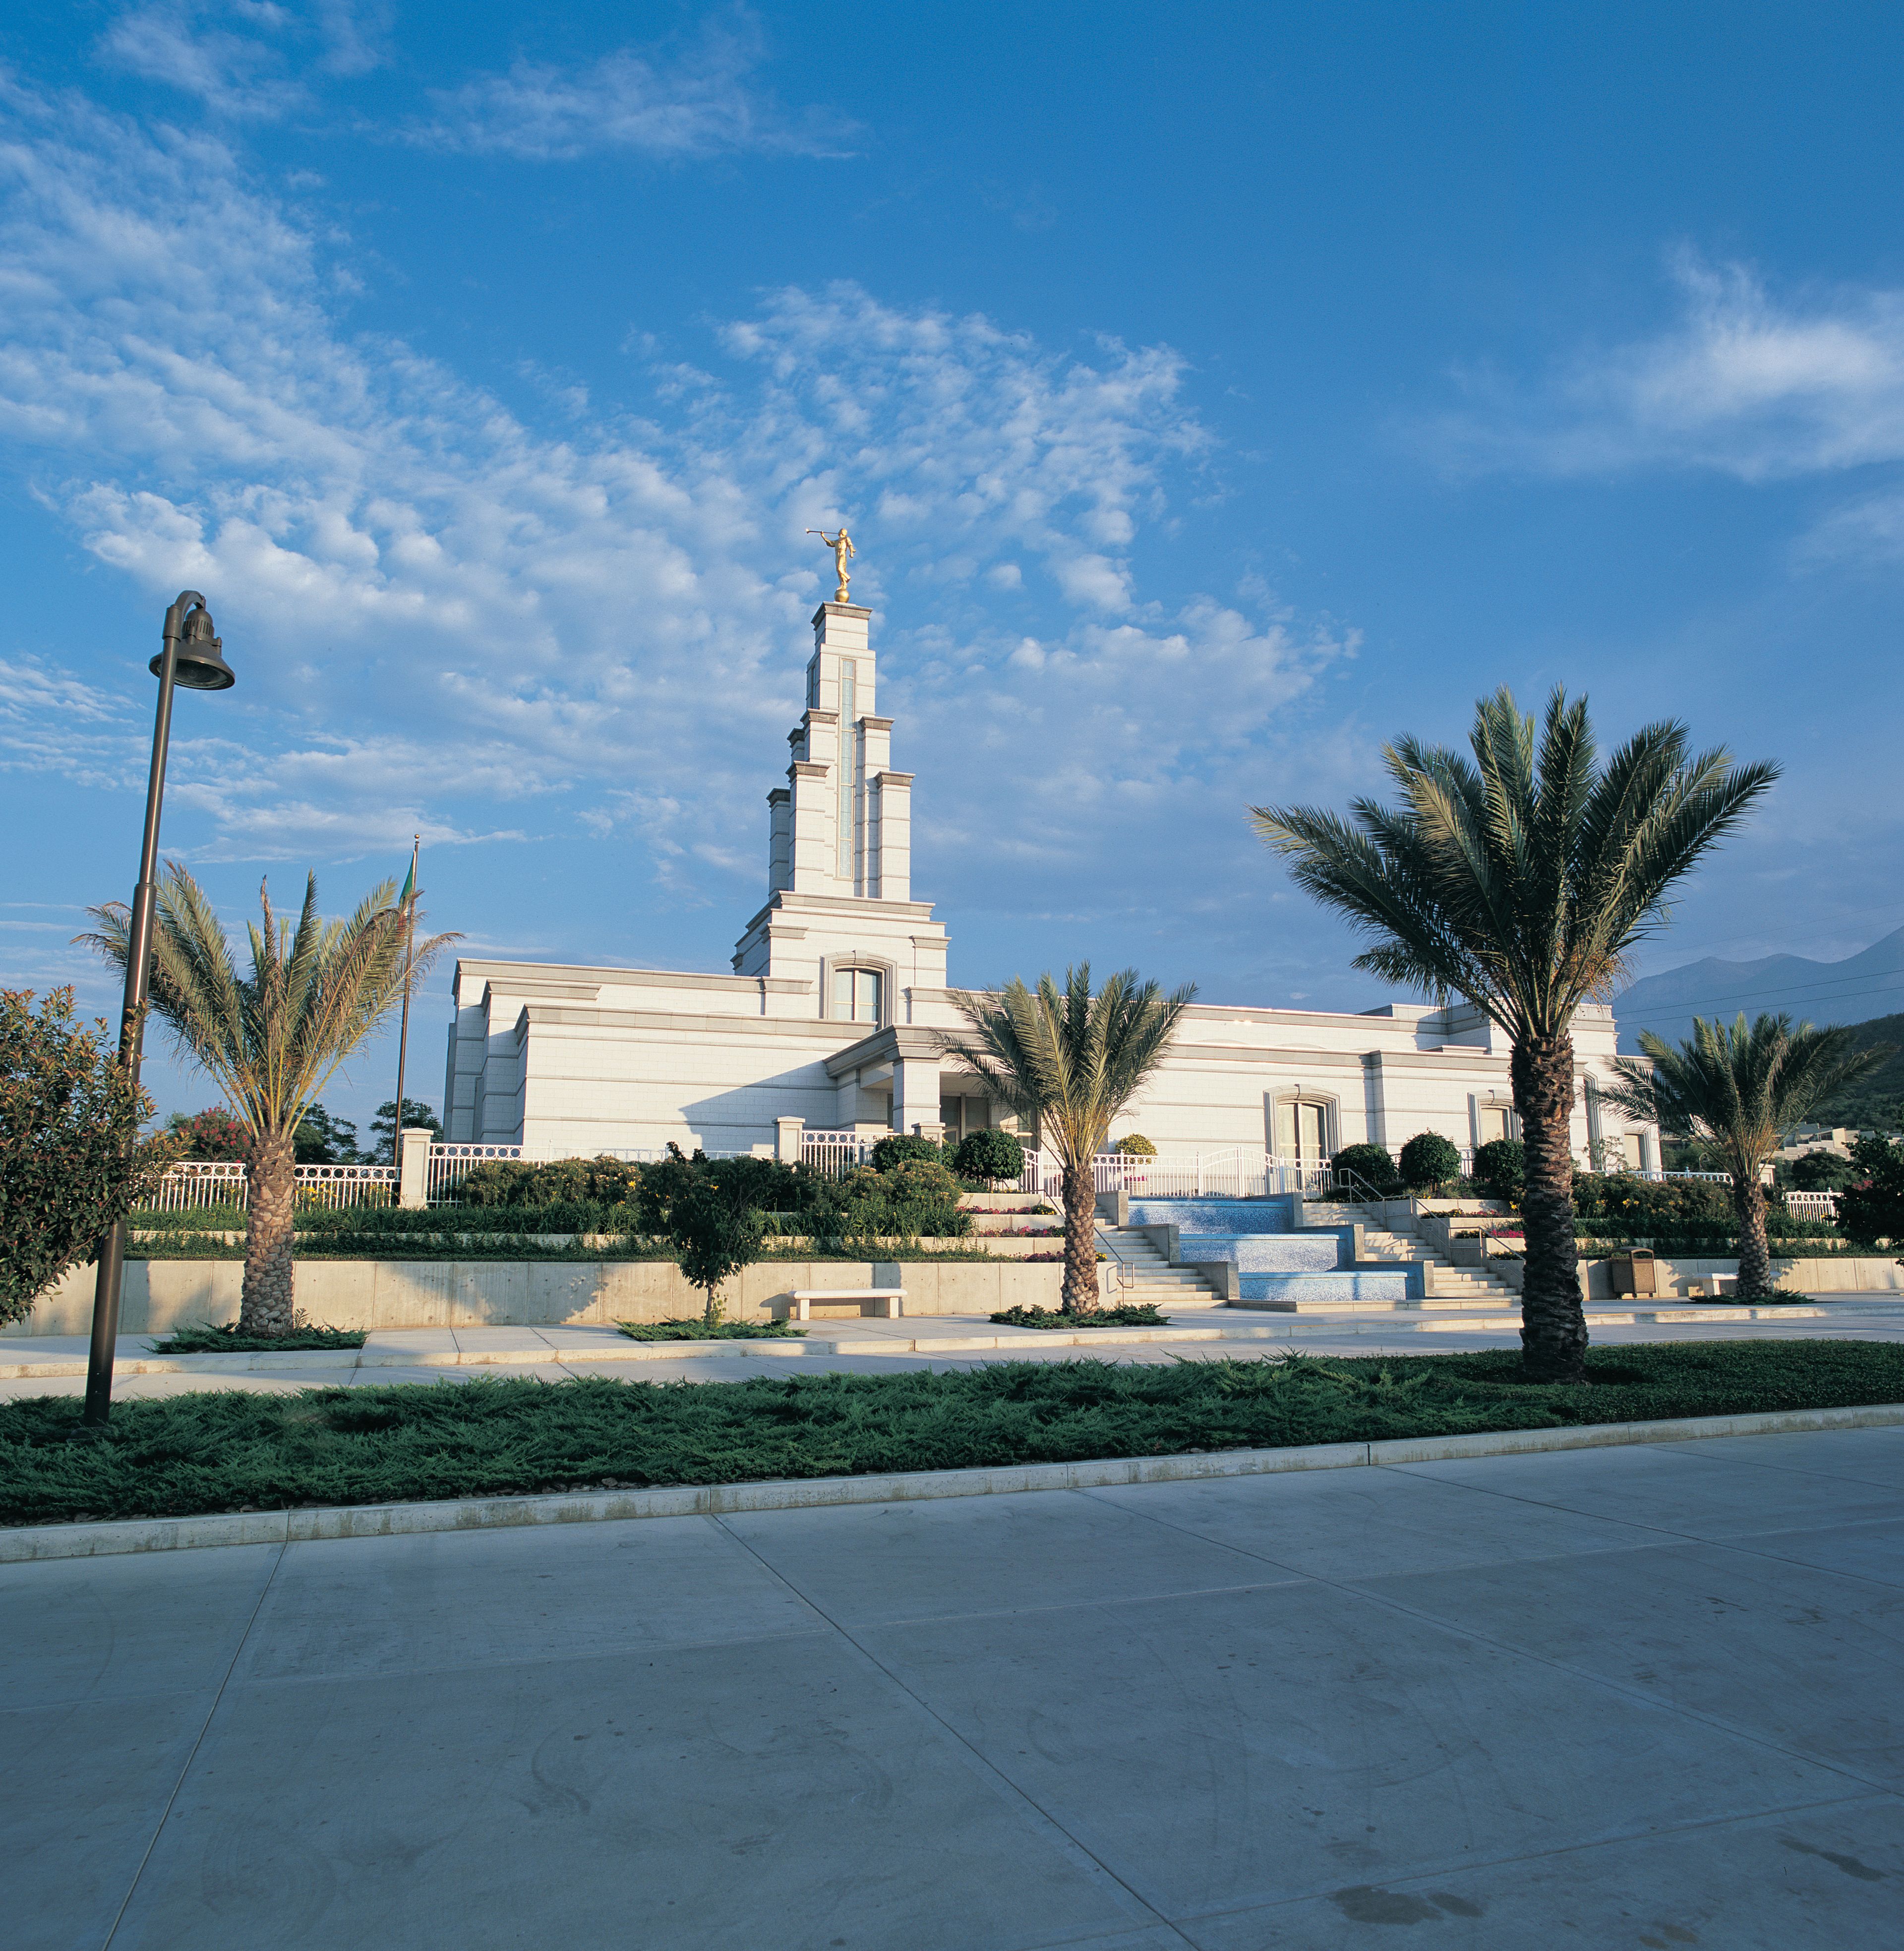 The Monterrey Mexico Temple and grounds.